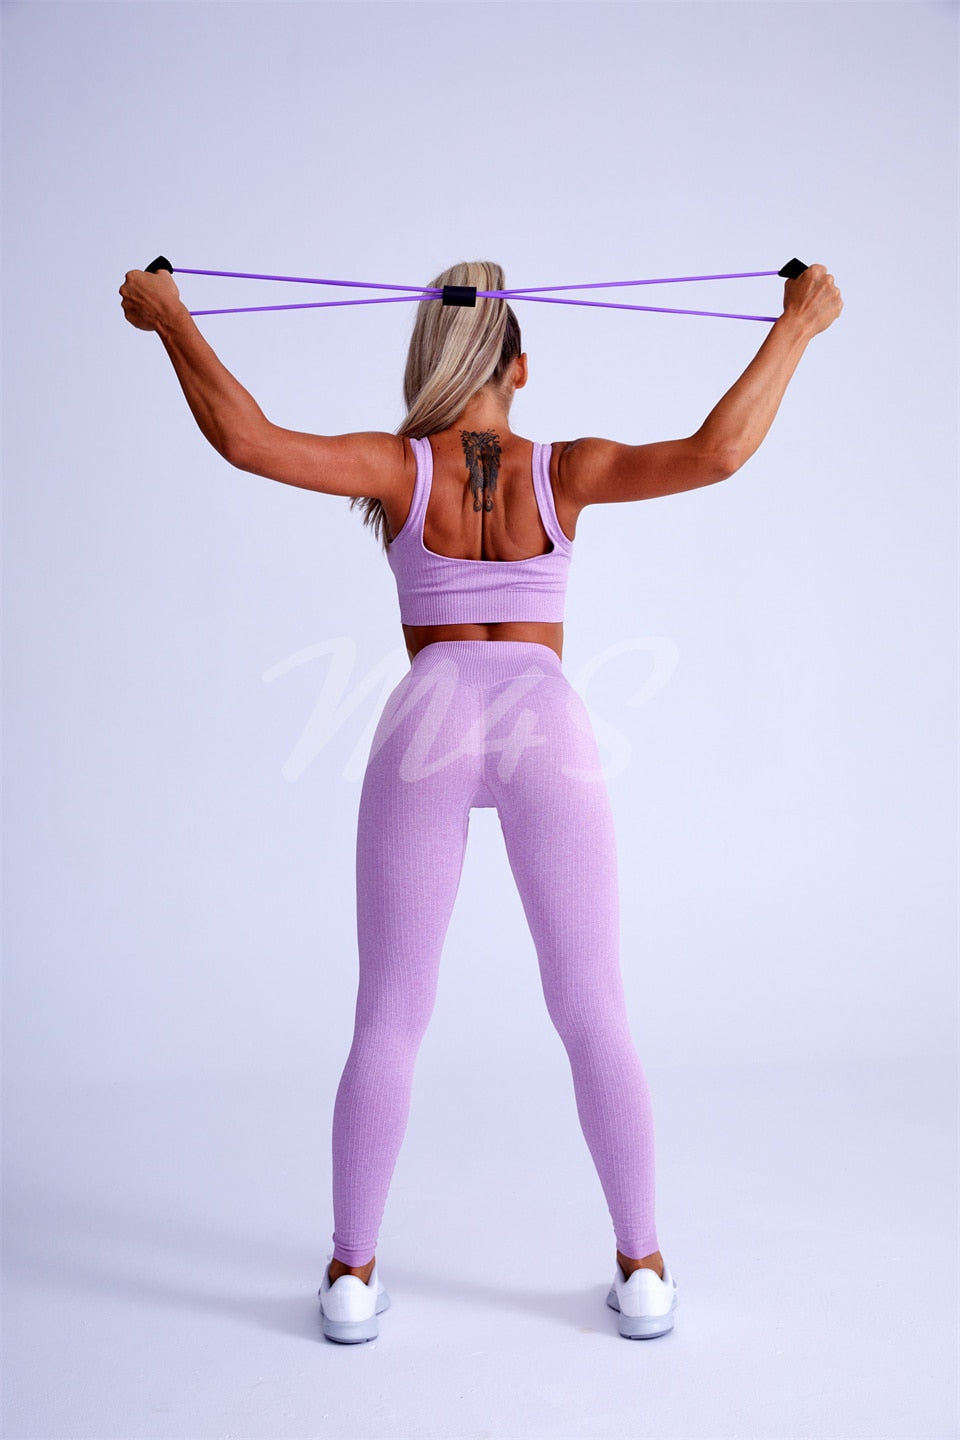 Ribbed Spandex Women's Tracksuit in pink stretching and working out behind